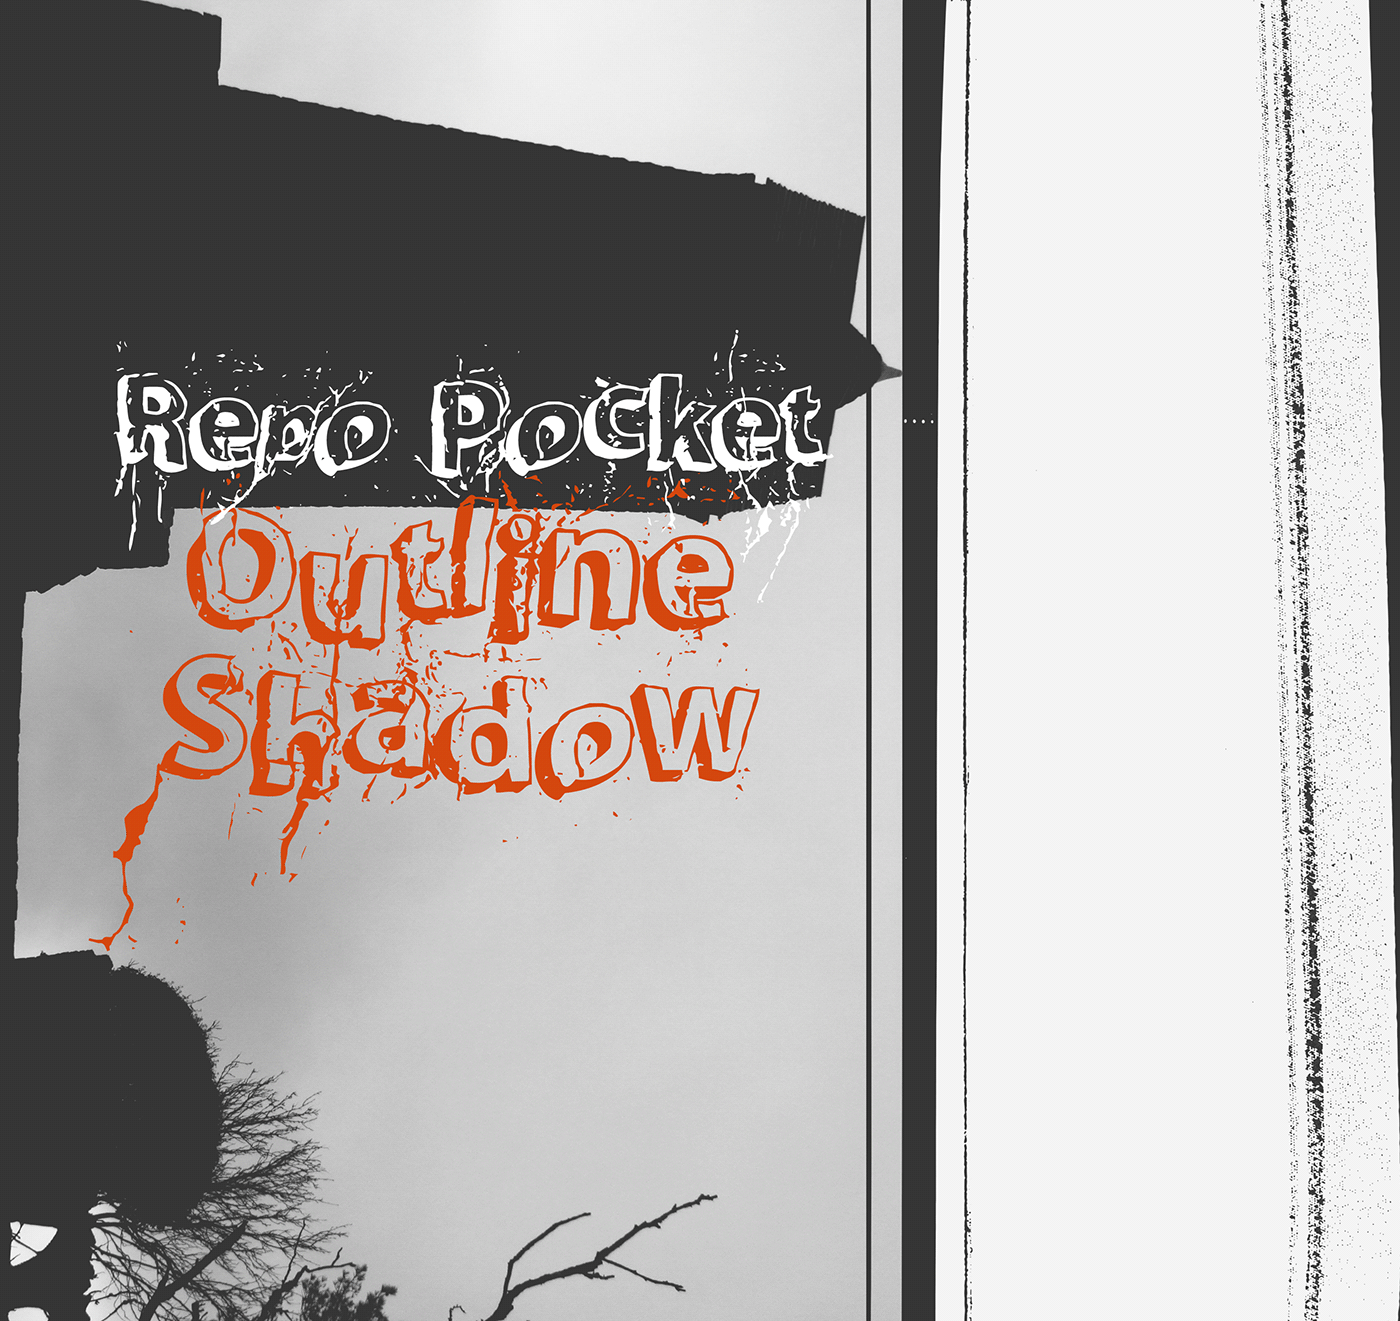 free fonts fonts experimental type Free font free Typeface photocopy Distressed outline shadow